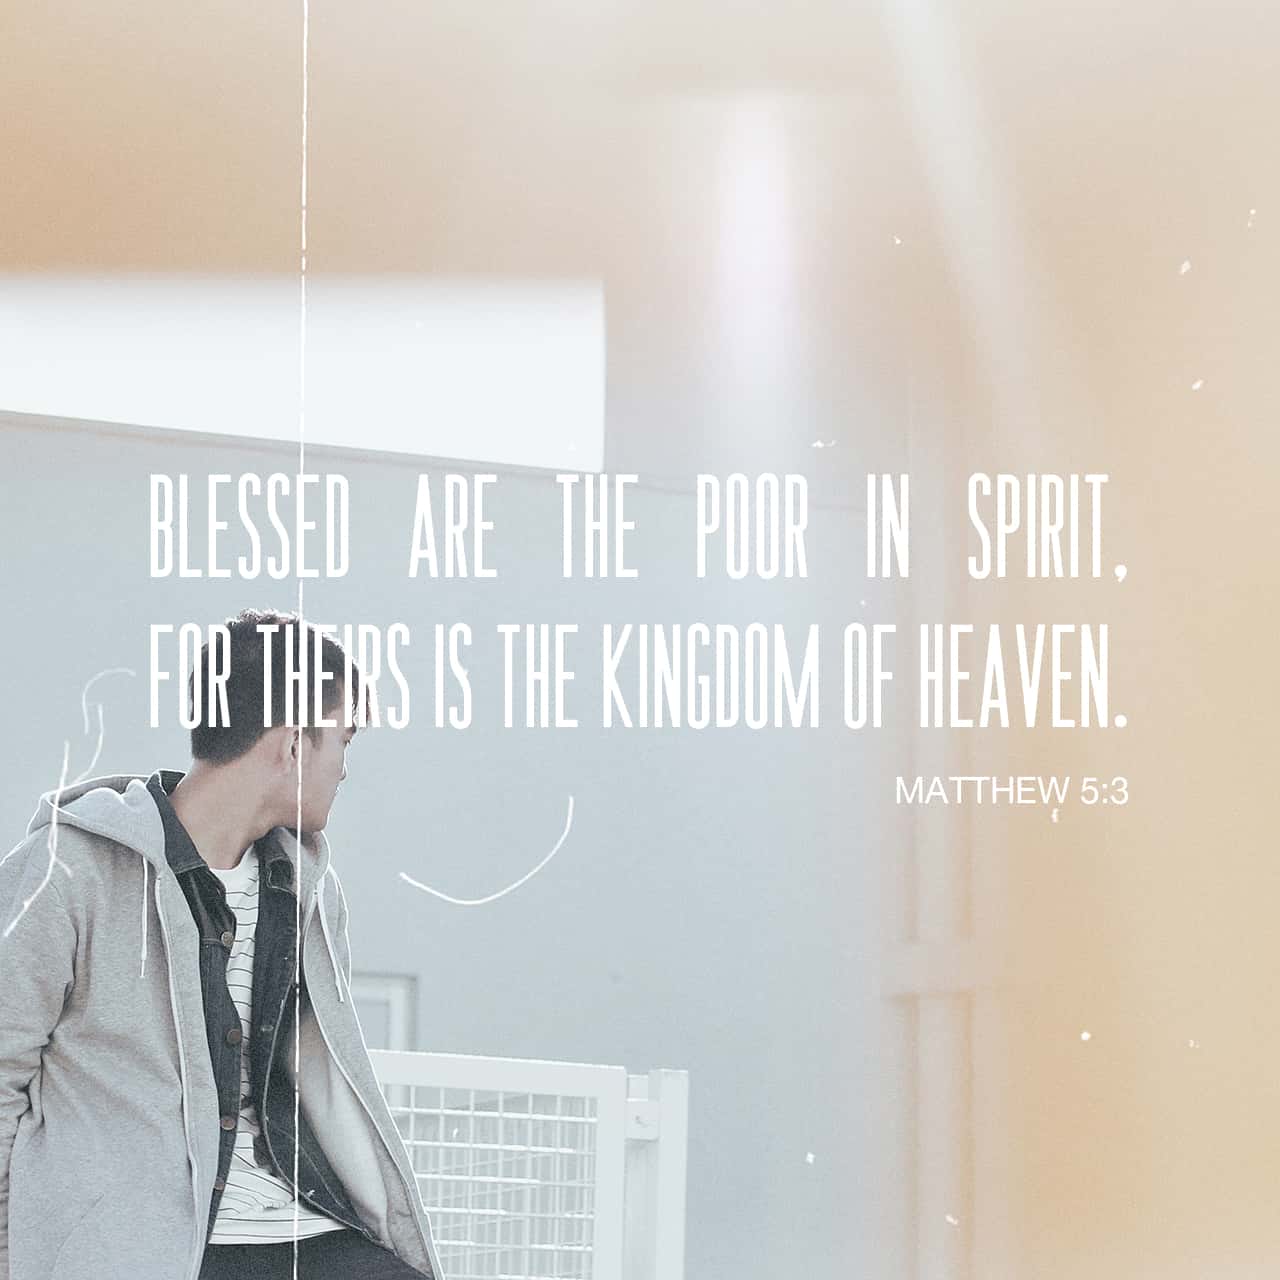 Matthew 5:3 “Blessed are the poor in spirit, for theirs is the kingdom of  heaven. | English Standard Version 2016 (ESV) | Download The Bible App Now